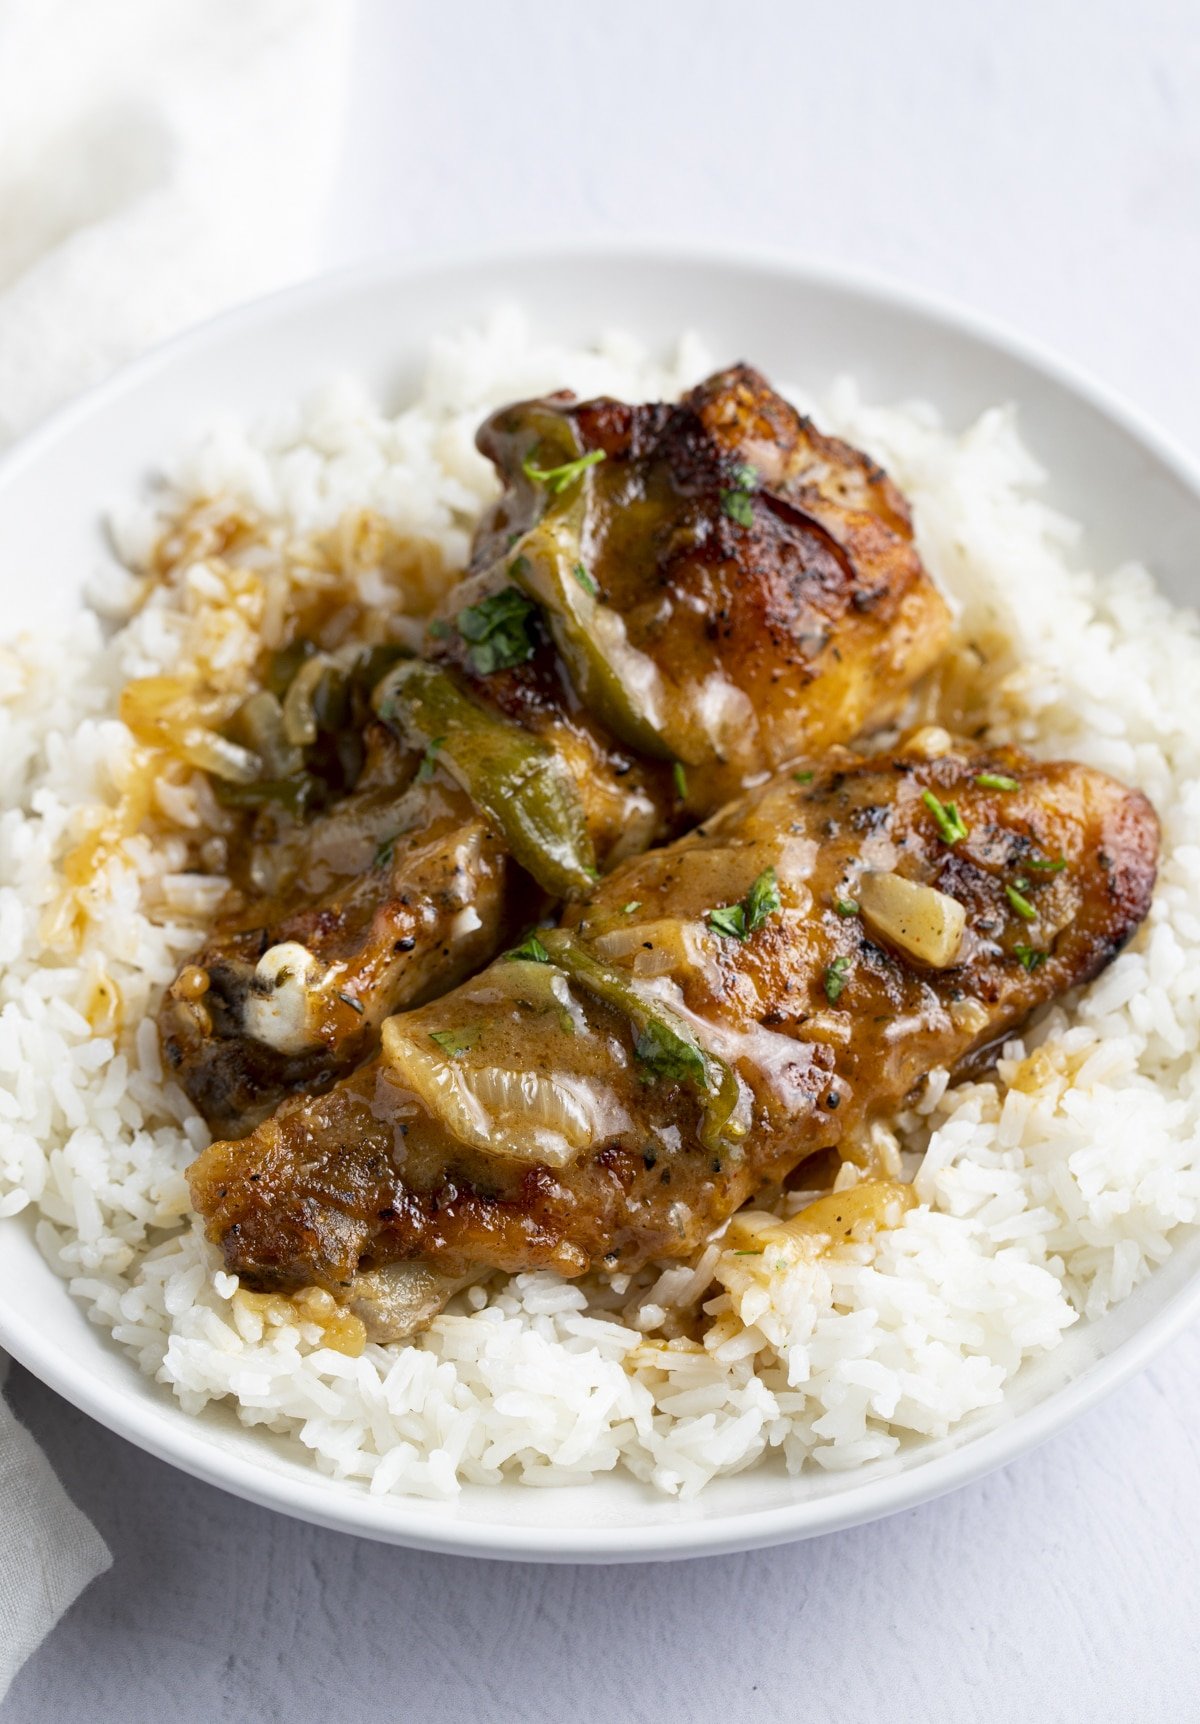 Two smothered turkey wings served on rice.